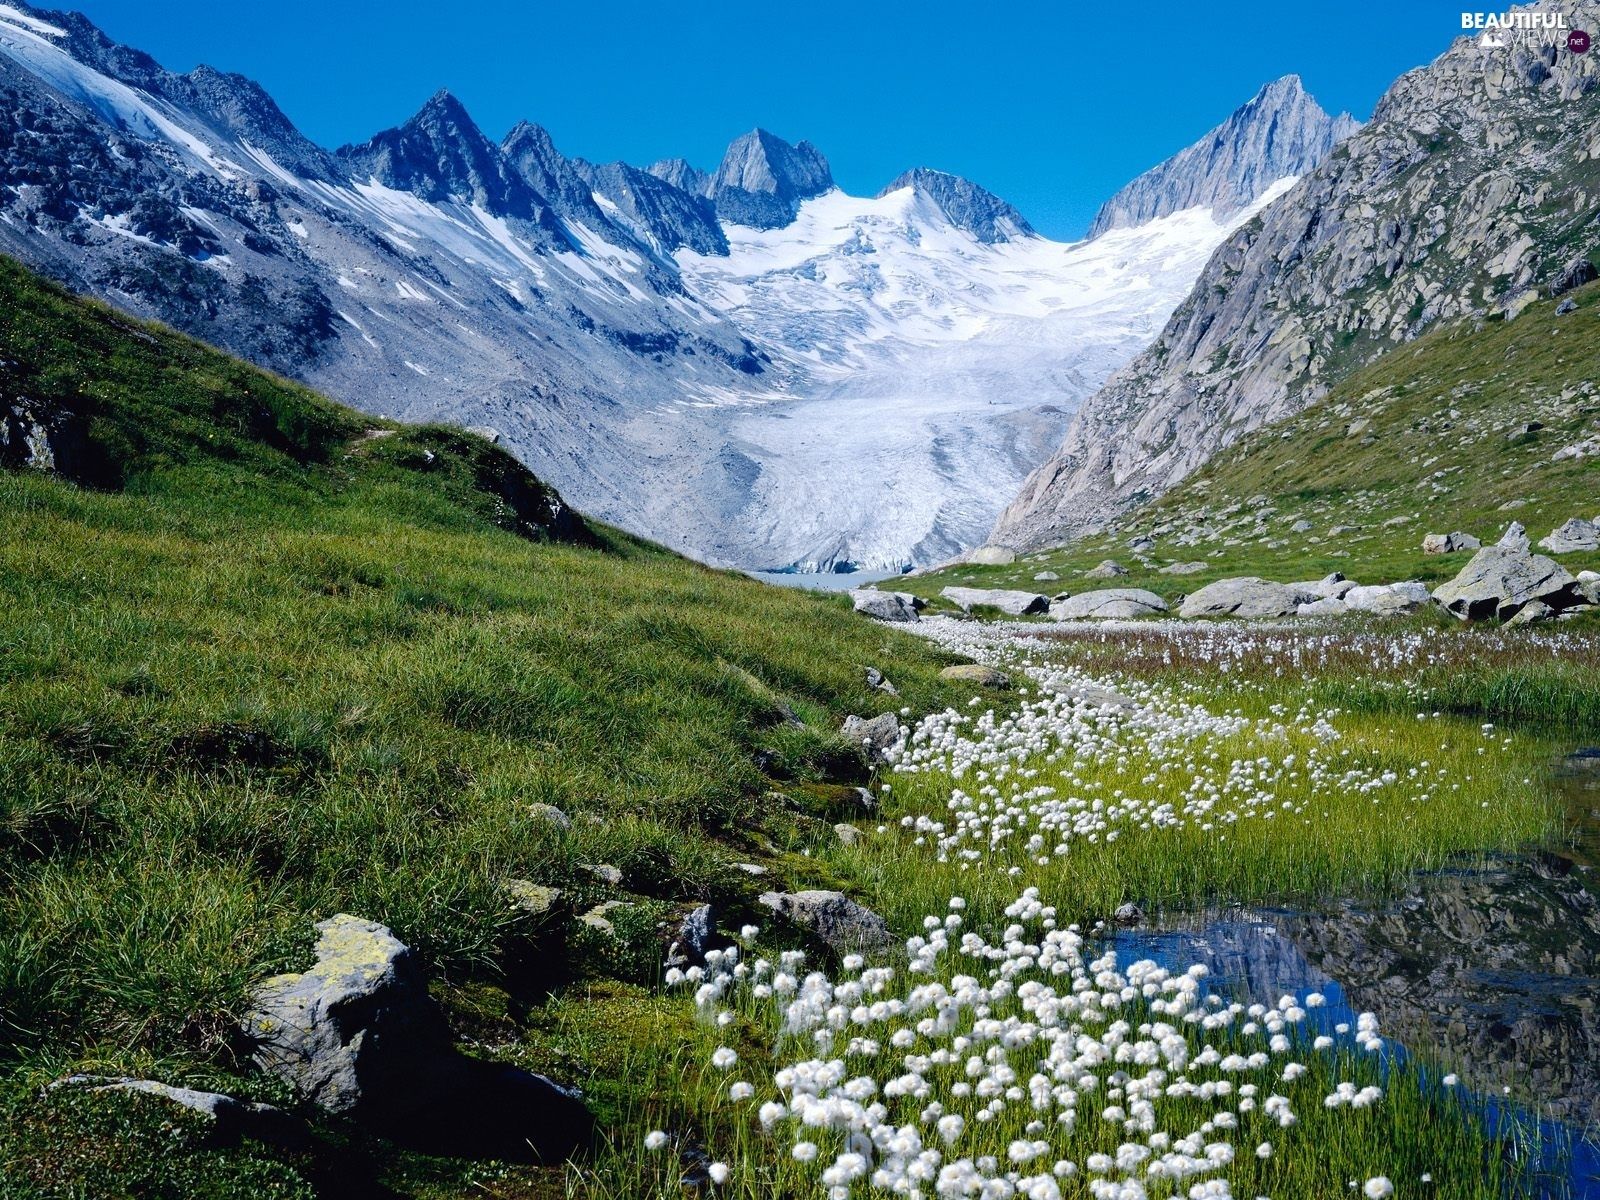 Mountains, The Hills, Flowers, Spring, Swiss Alps, peaks views wallpaper: 2880x1800